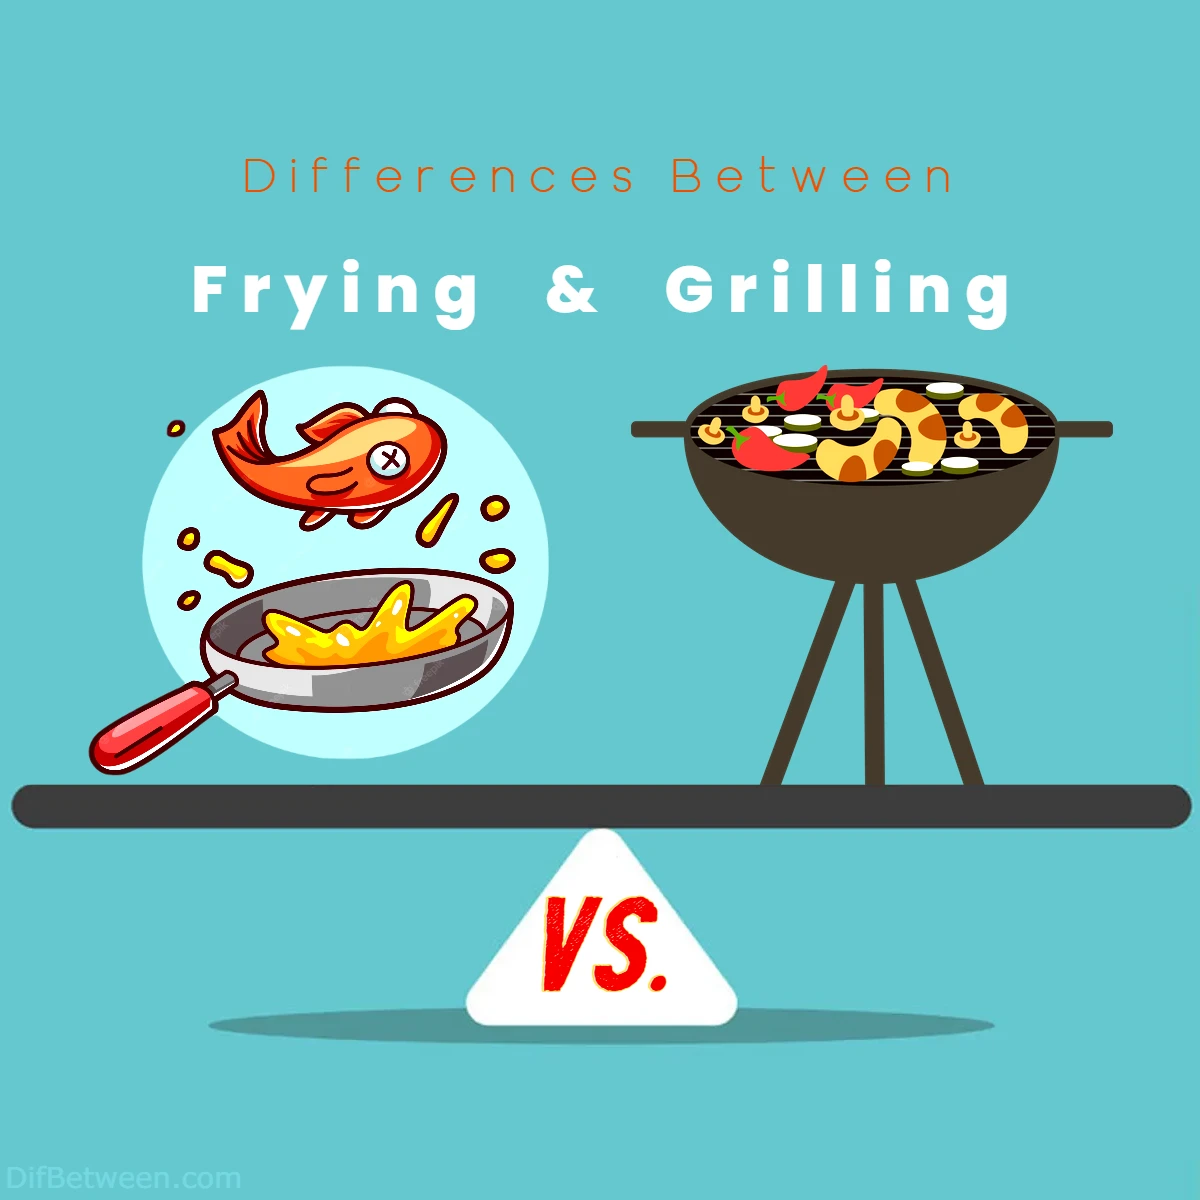 Differences Between Frying vs Grilling